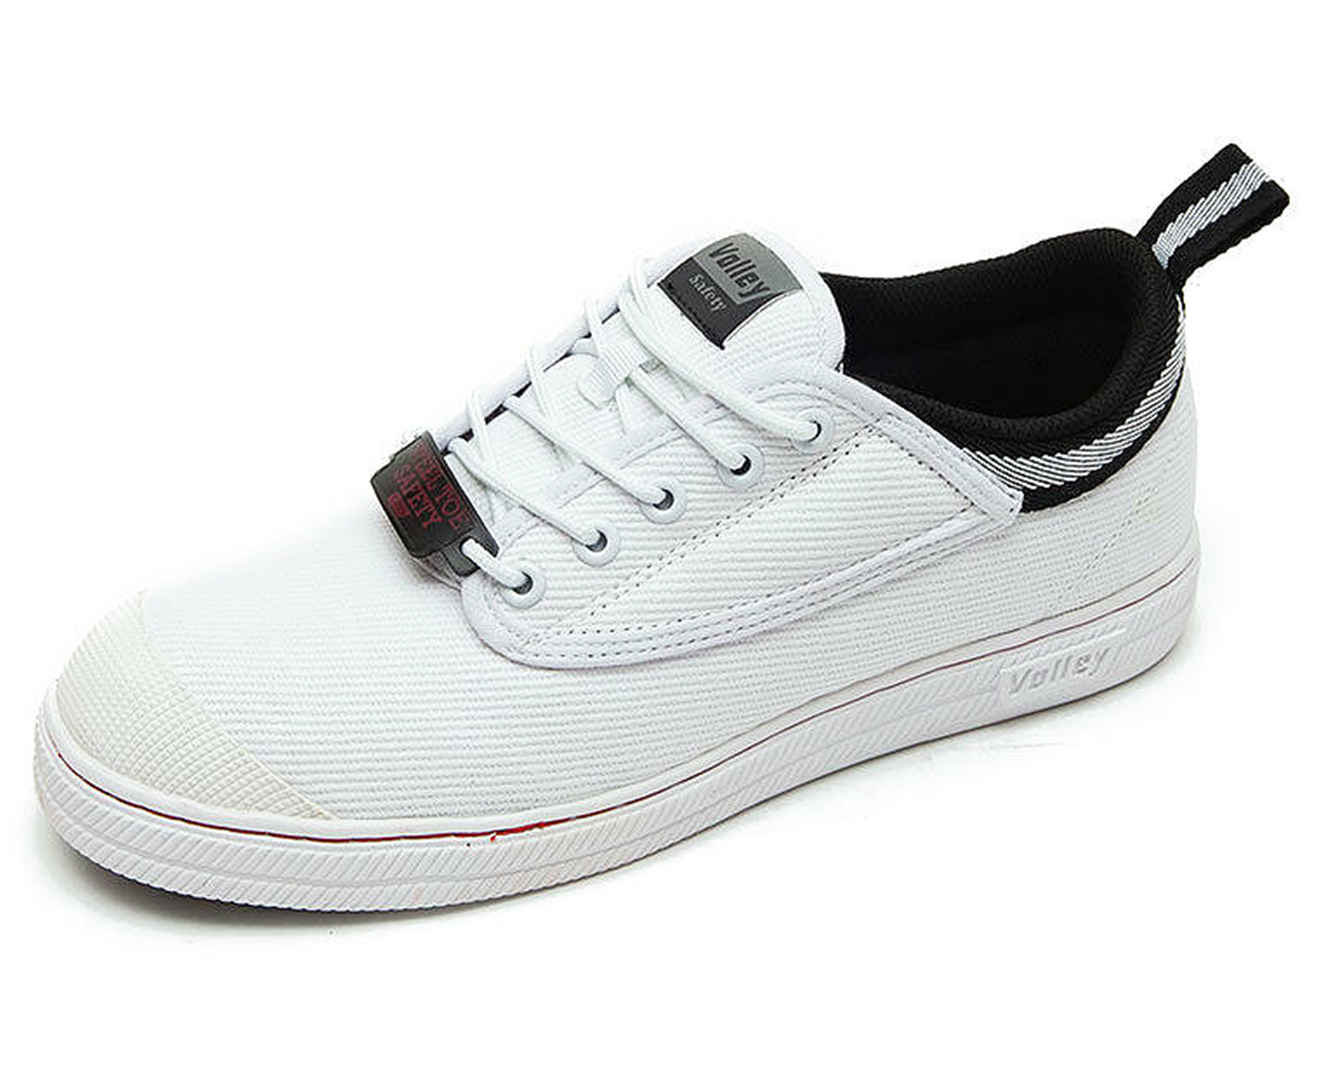 dunlop volleys safety shoes